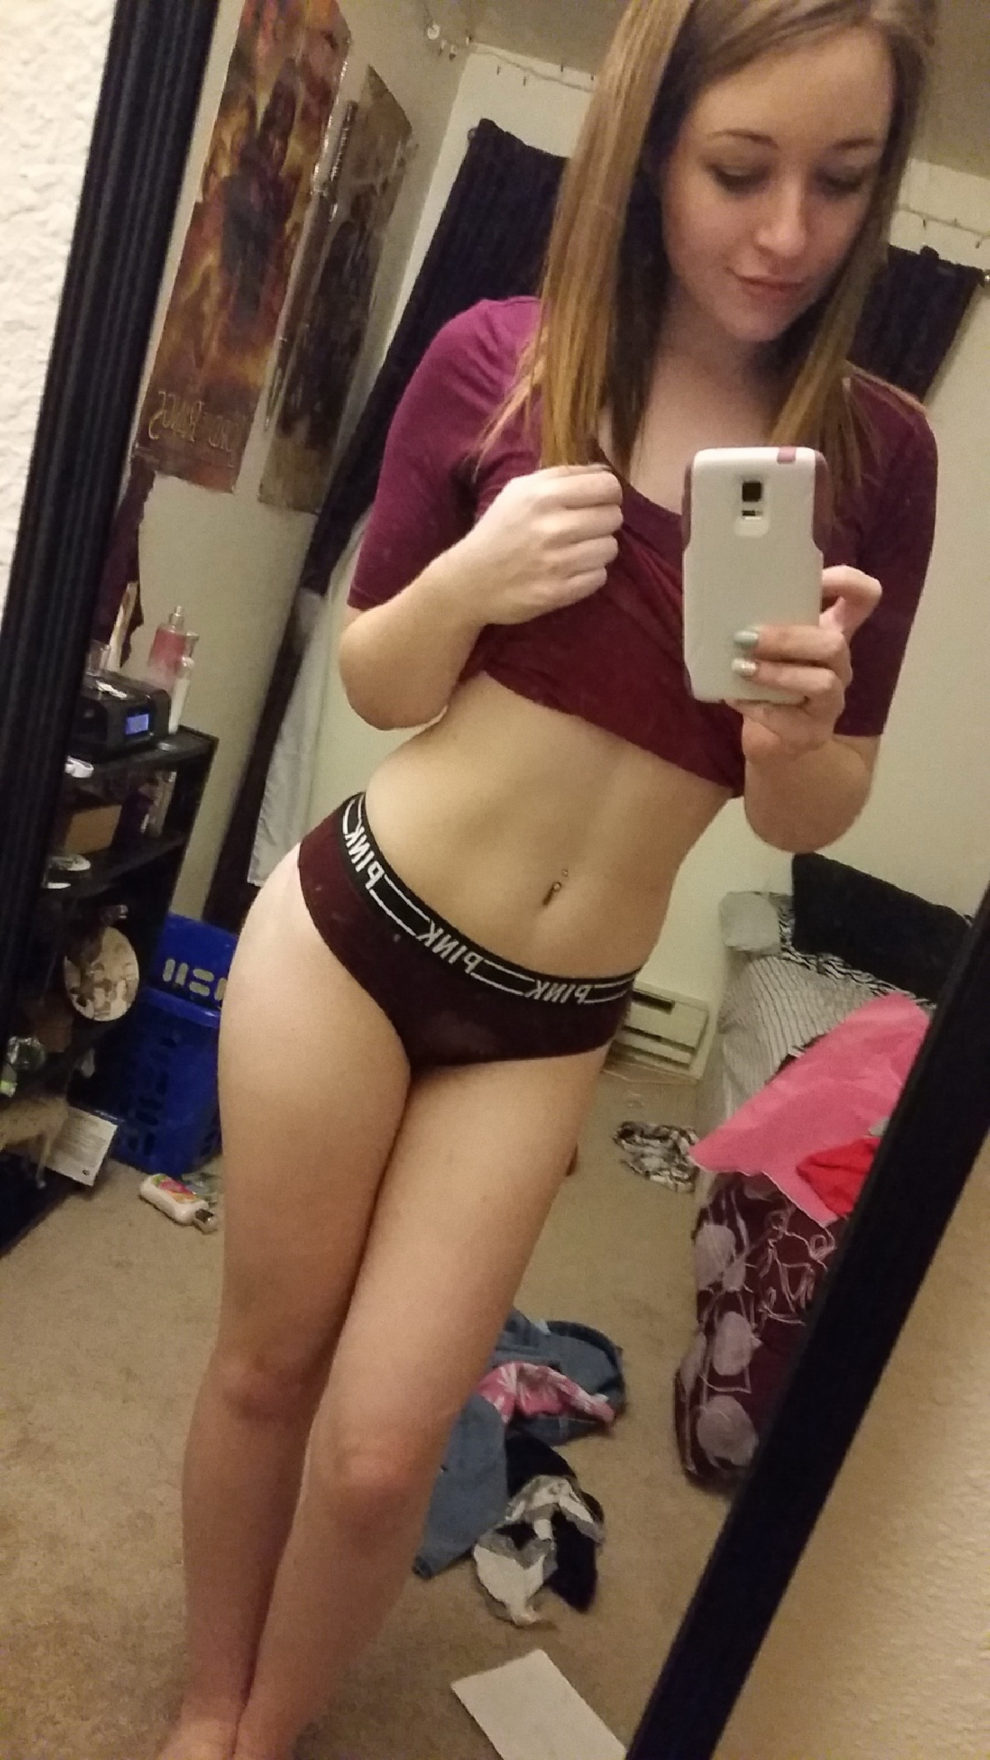 Brunette girl looking to trade. My snapchat is kateanney